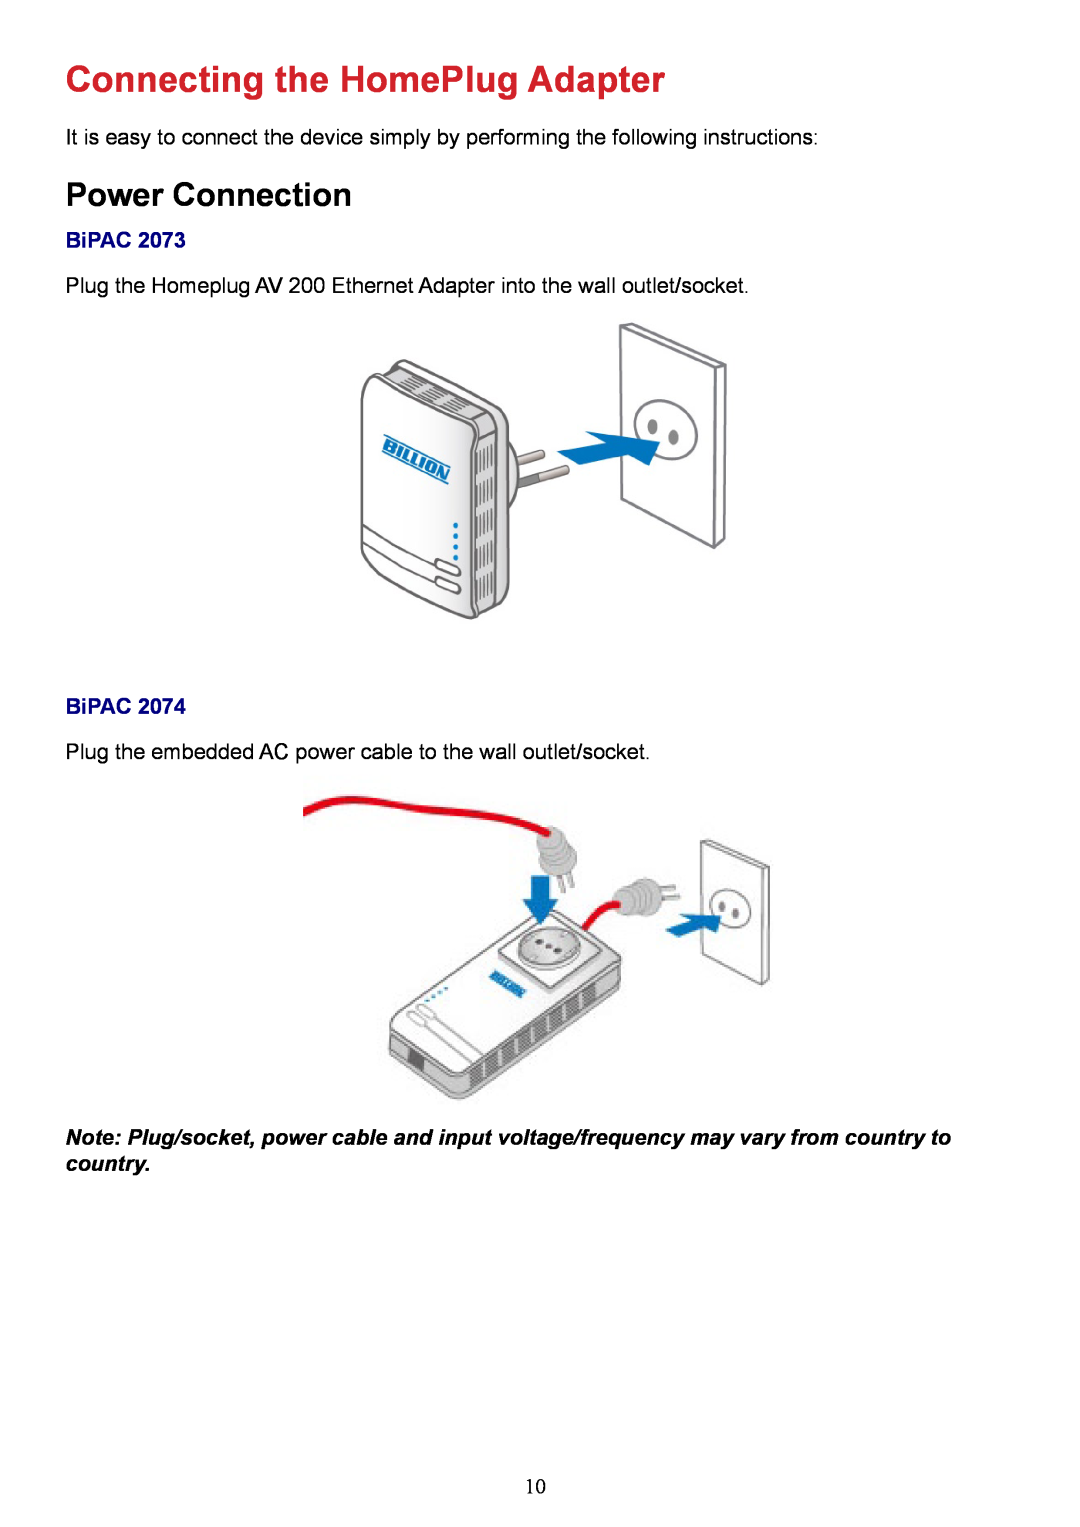 Billion Electric Company 2073 user manual Connecting the HomePlug Adapter, Power Connection 